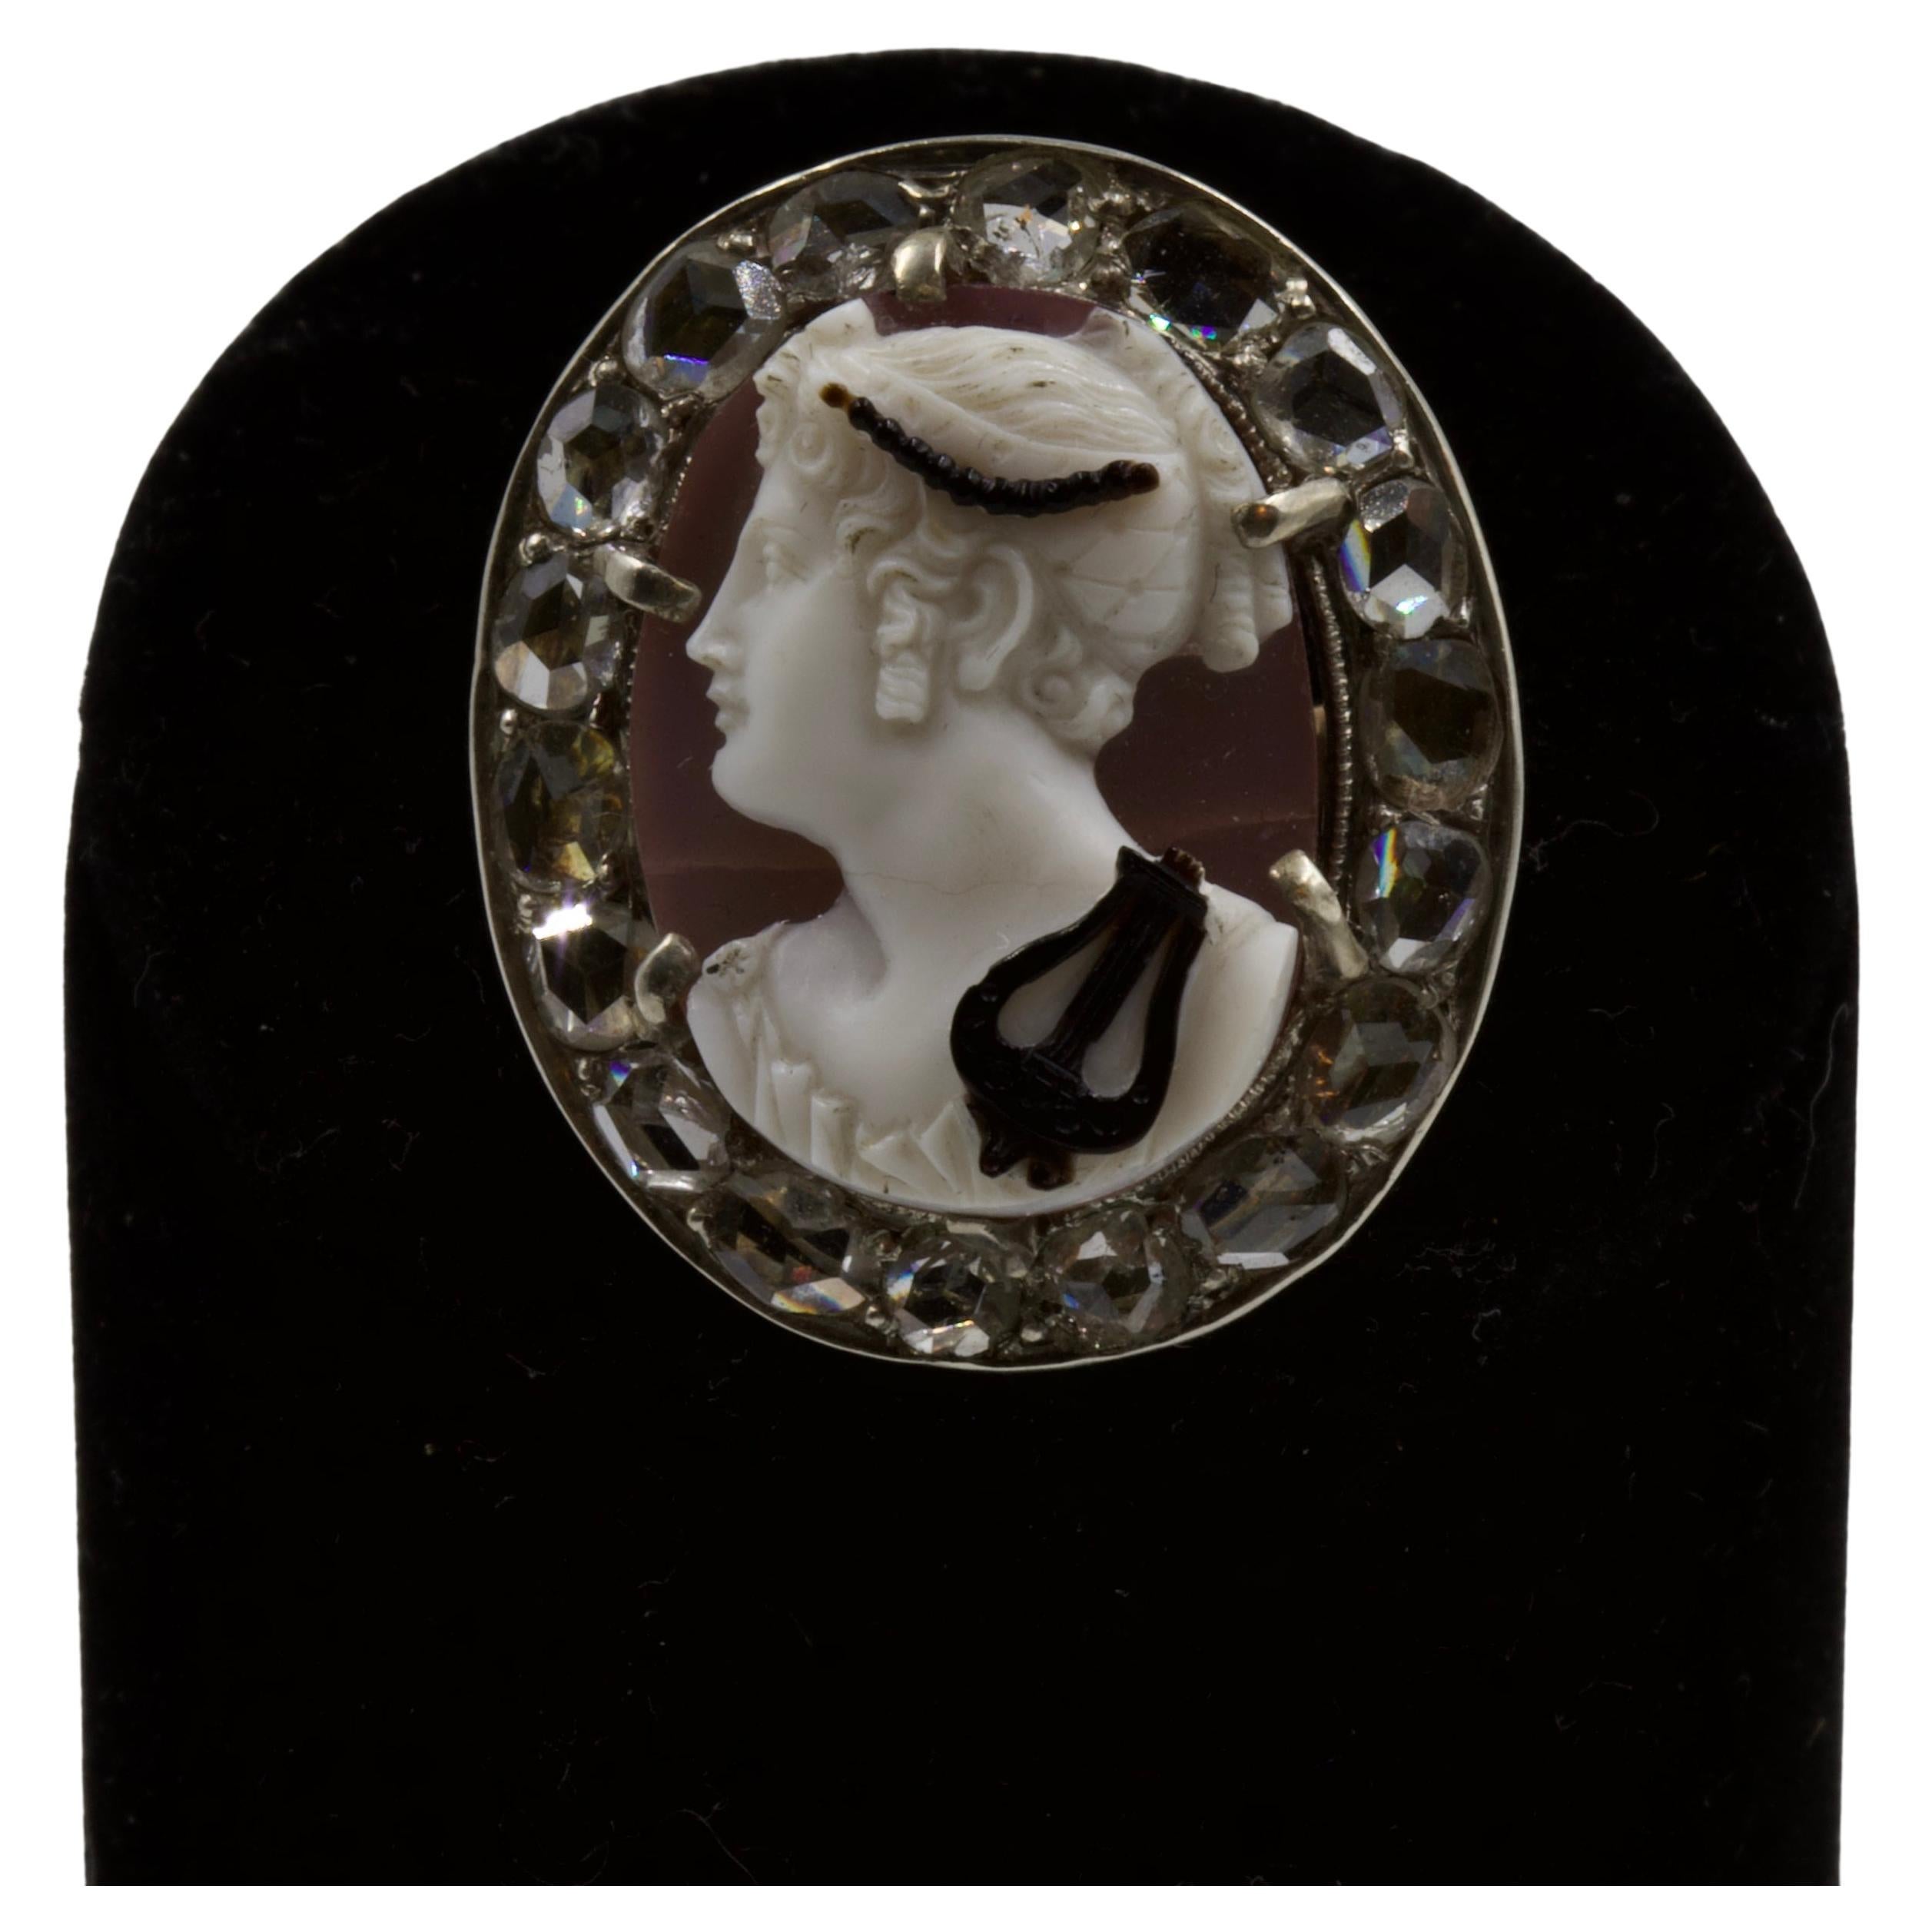 Romantic ring, antique-style cameo with the profile of Erato, muse of lyrical poetry, entourage of rose-cut diamonds, yellow and pink gold, circa 1820-1840

ABOUT SECOND PETALE GALLERY
Paris-based online gallery SECOND PETALE specializes in art